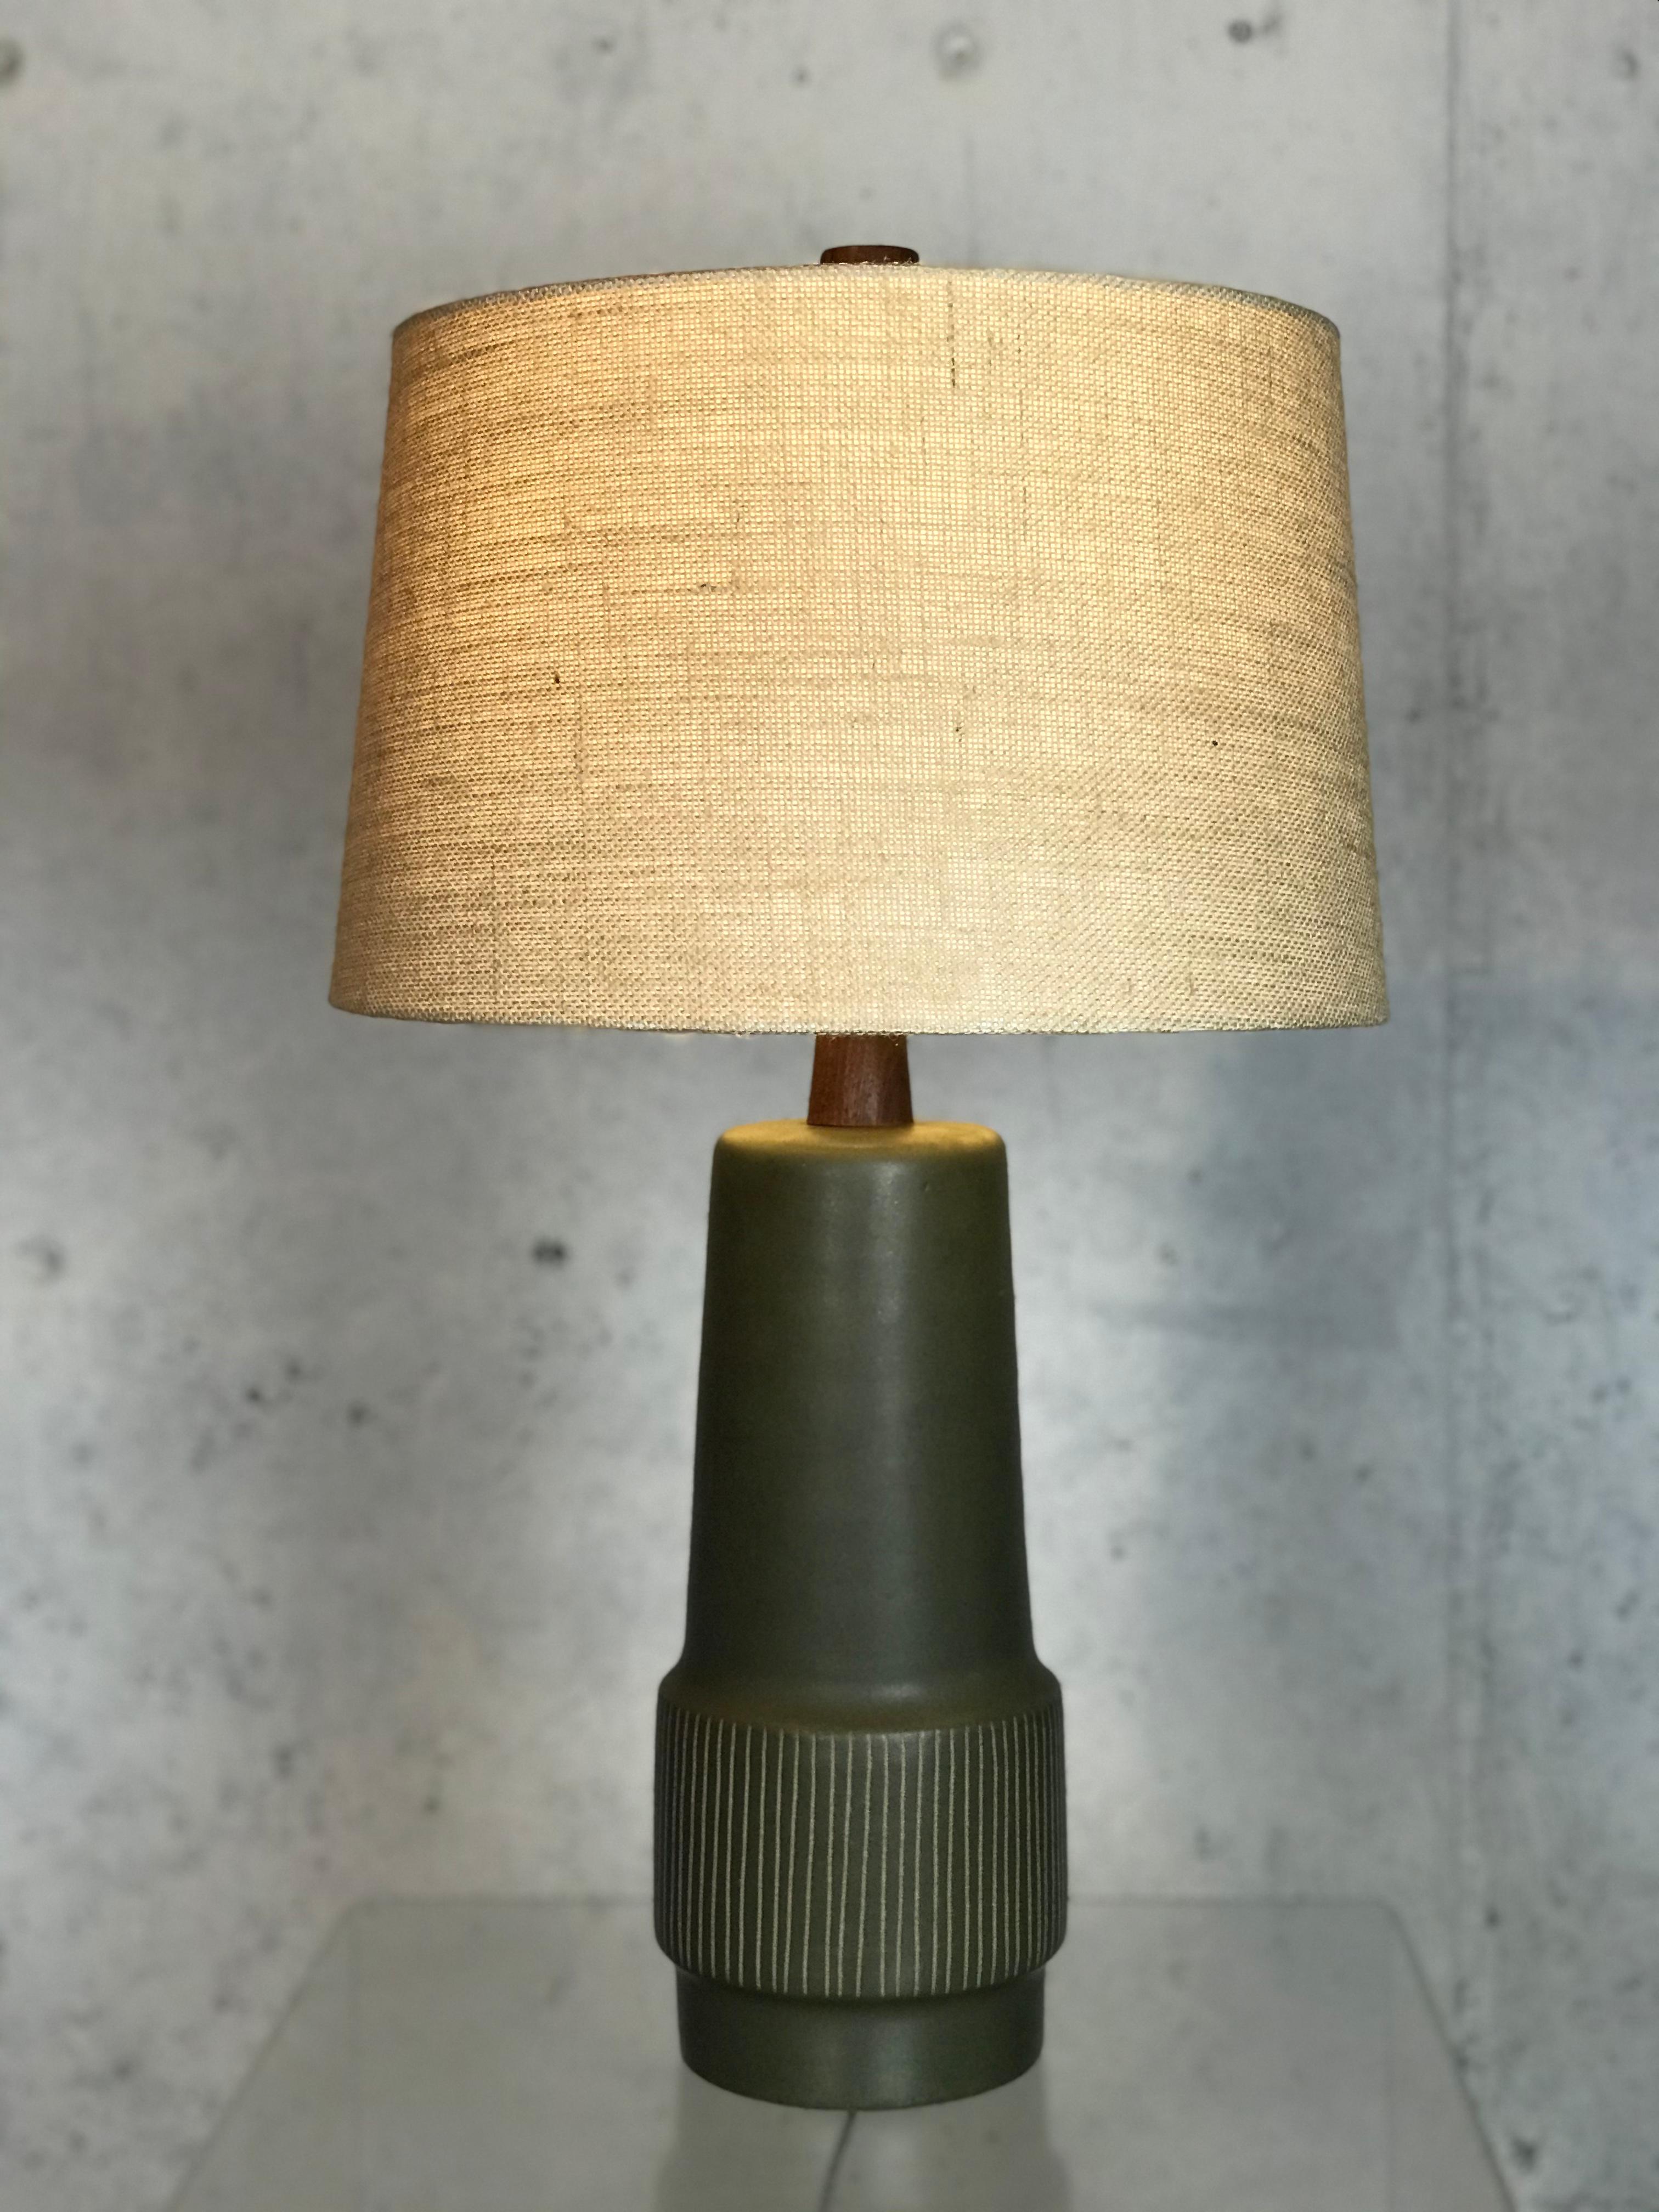 Etched Classic Sgraffito Ceramic Lamp by Jane & Gordon Martz for Marshall Studios